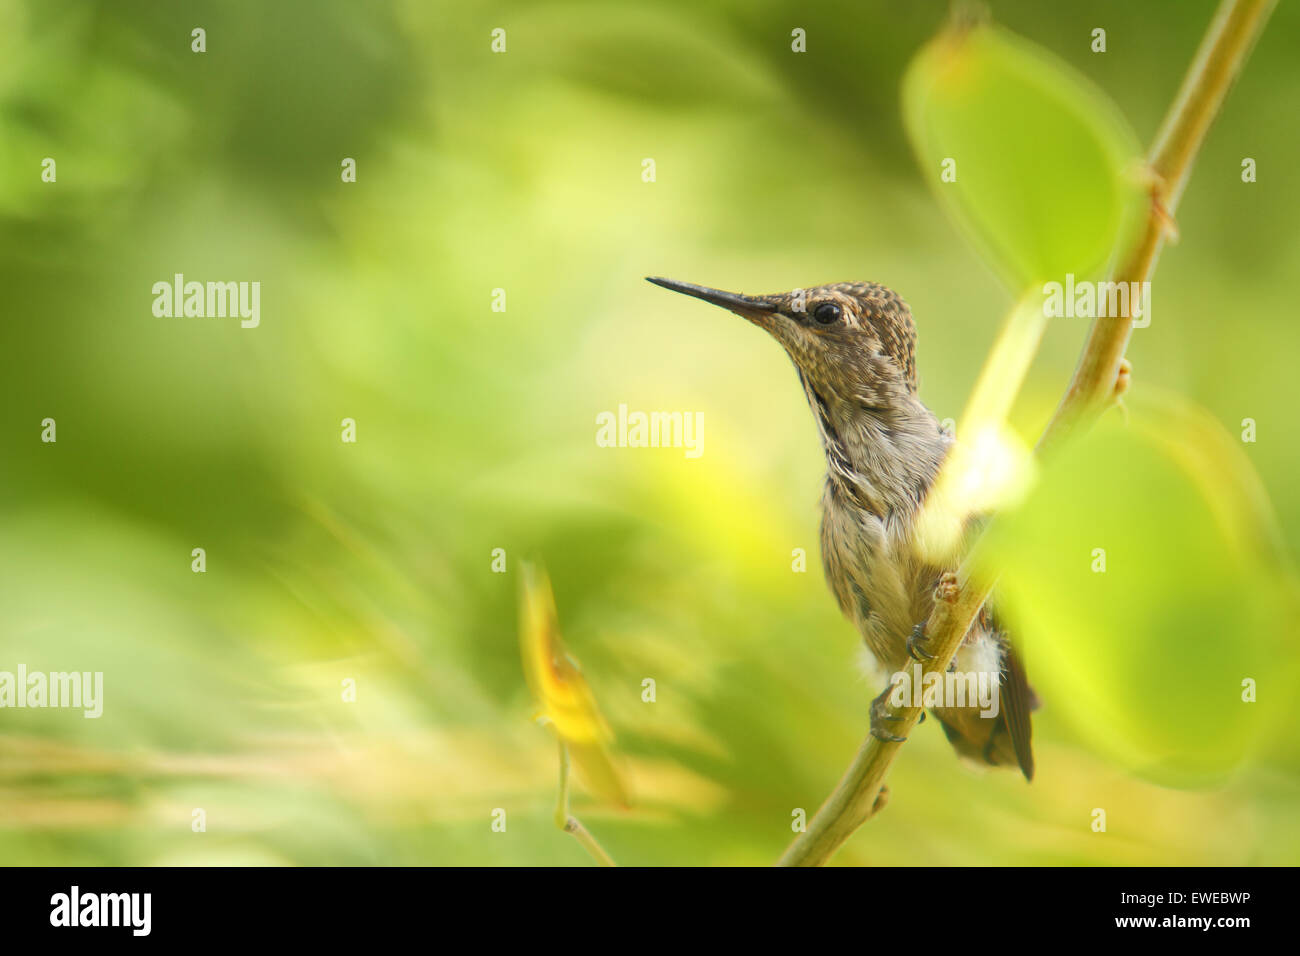 North American hummingbirds raising young fledglings in a nest Stock Photo